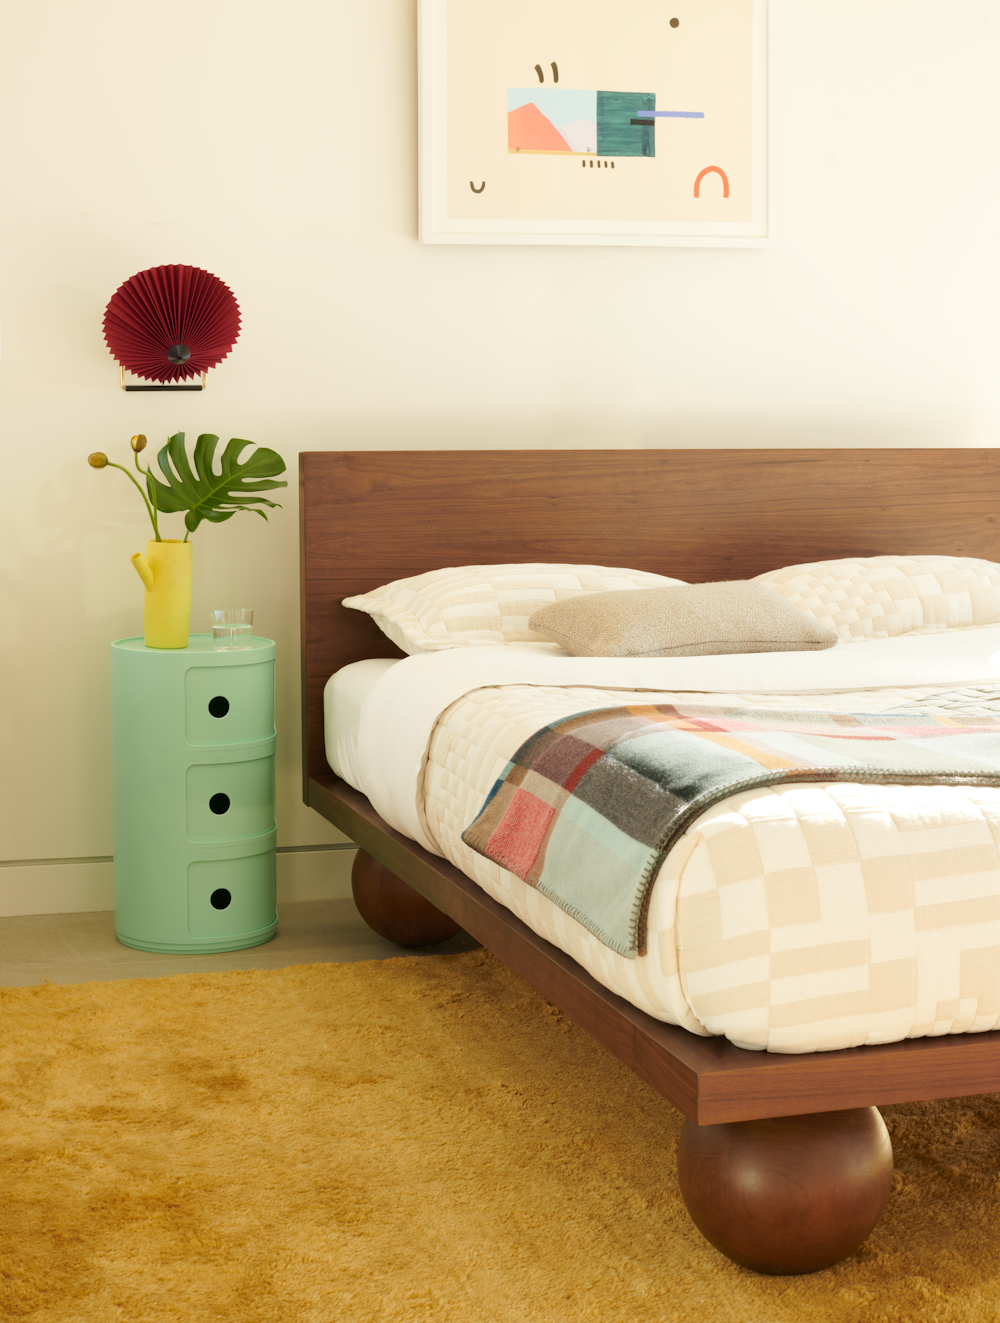 Yoko Bed, Matin Wall Sconce,  and Componibili Bio Storage Unit in a bedroom setting